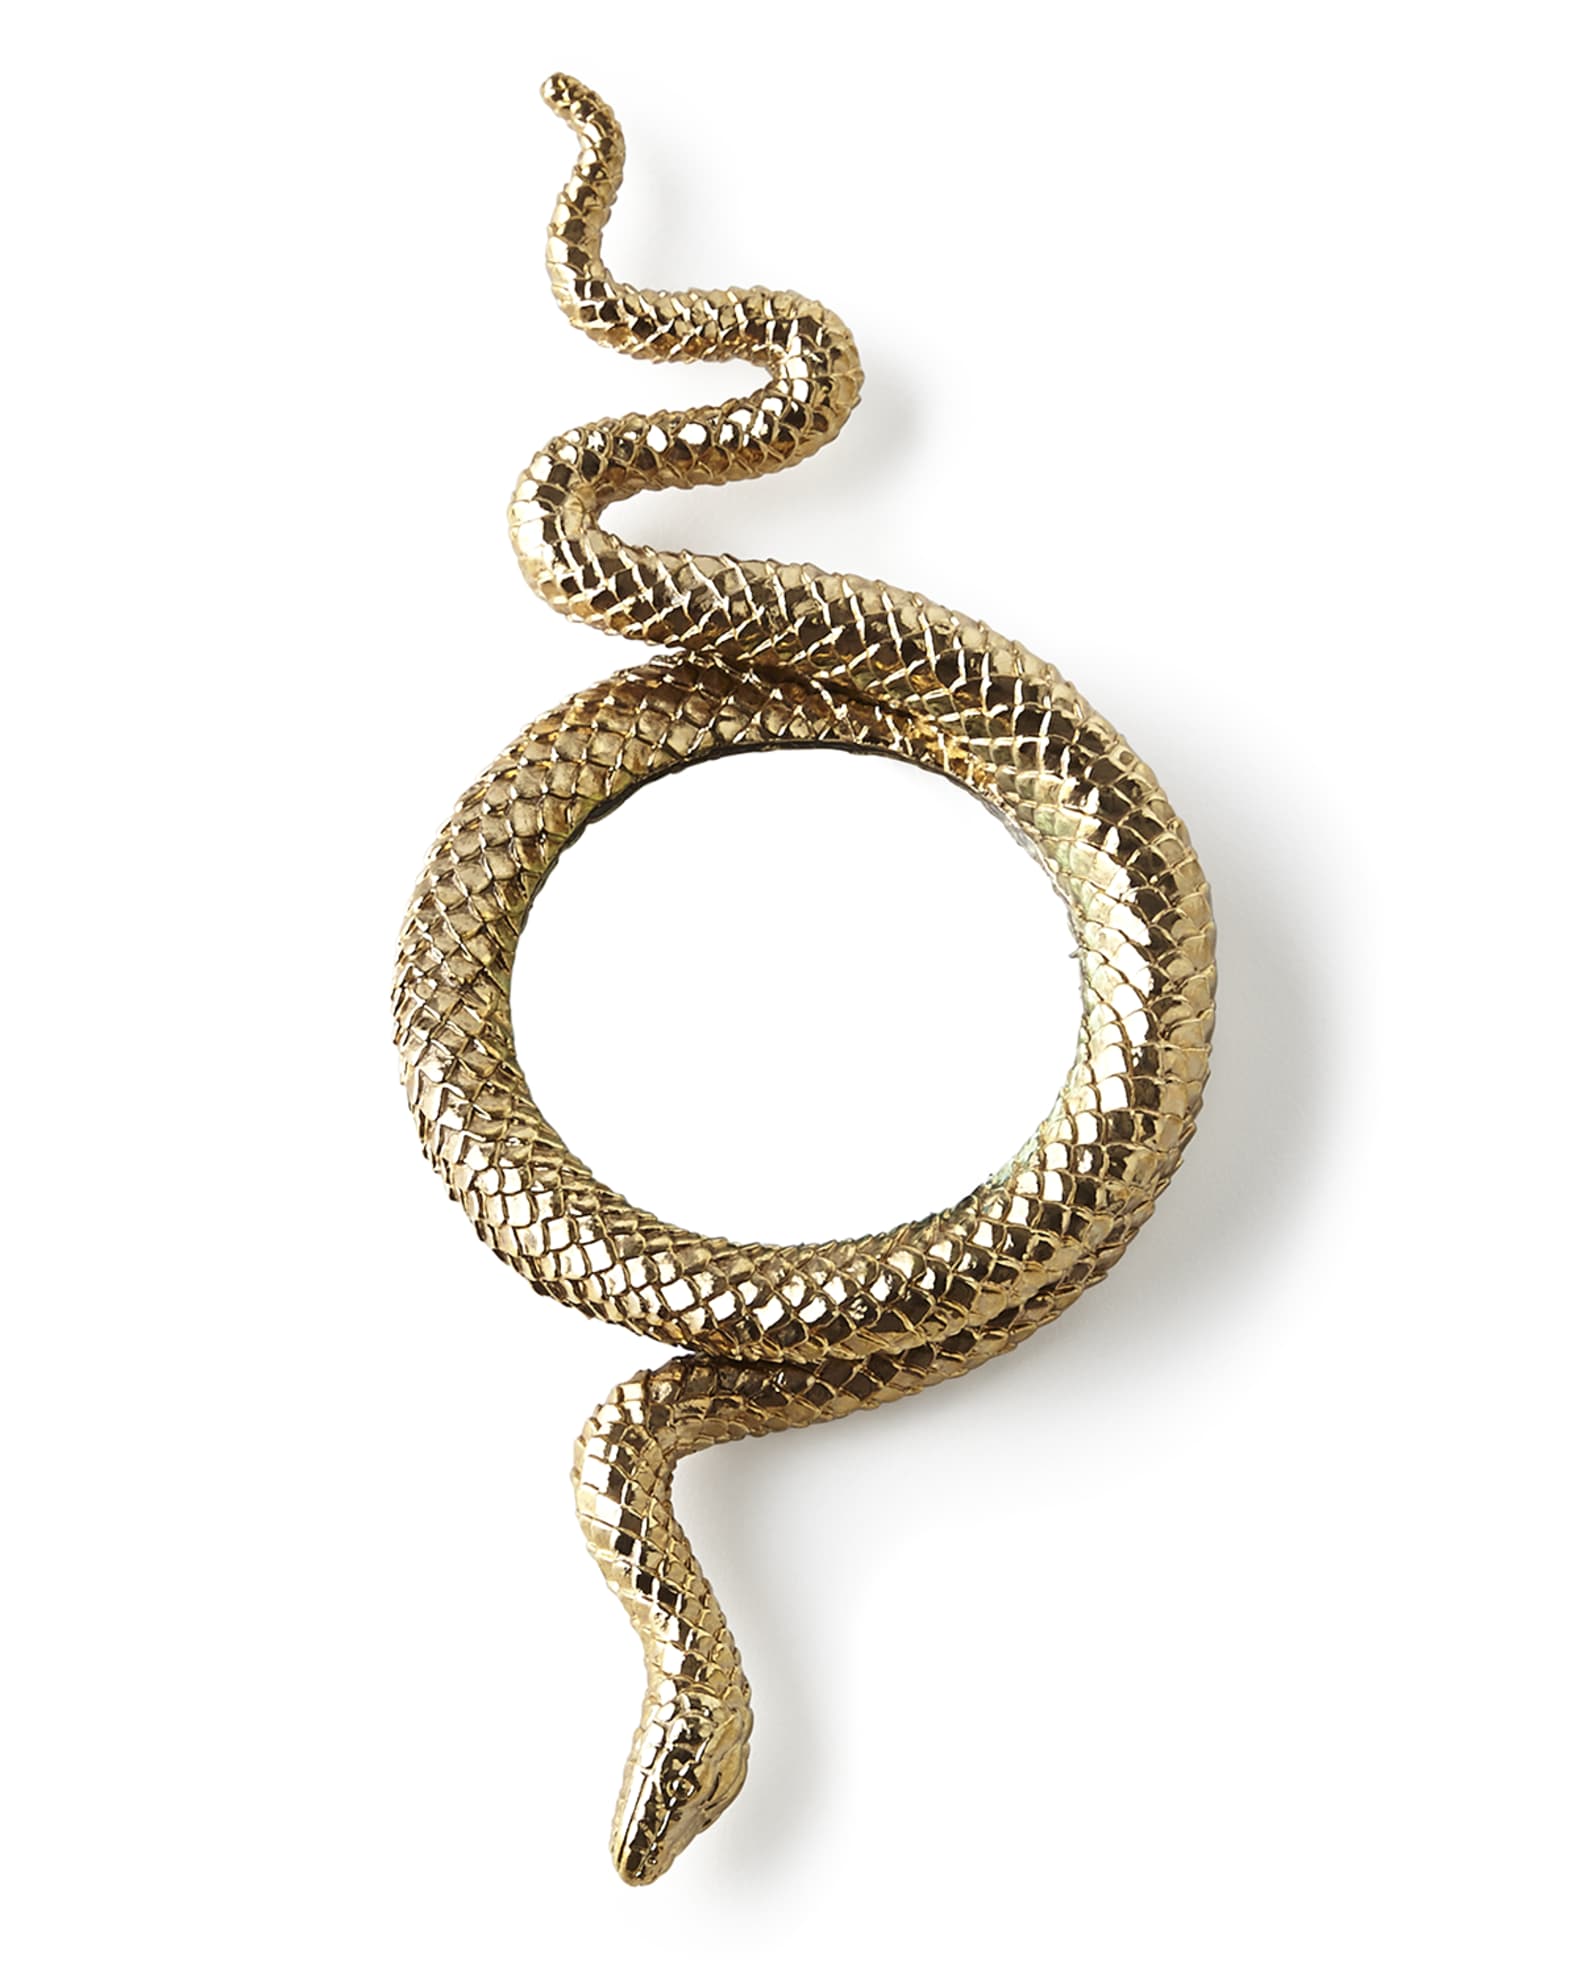 Gold Snake Magnifying Glass Spy Reading Glass Gold-Plated Metal Coiled Detailed 